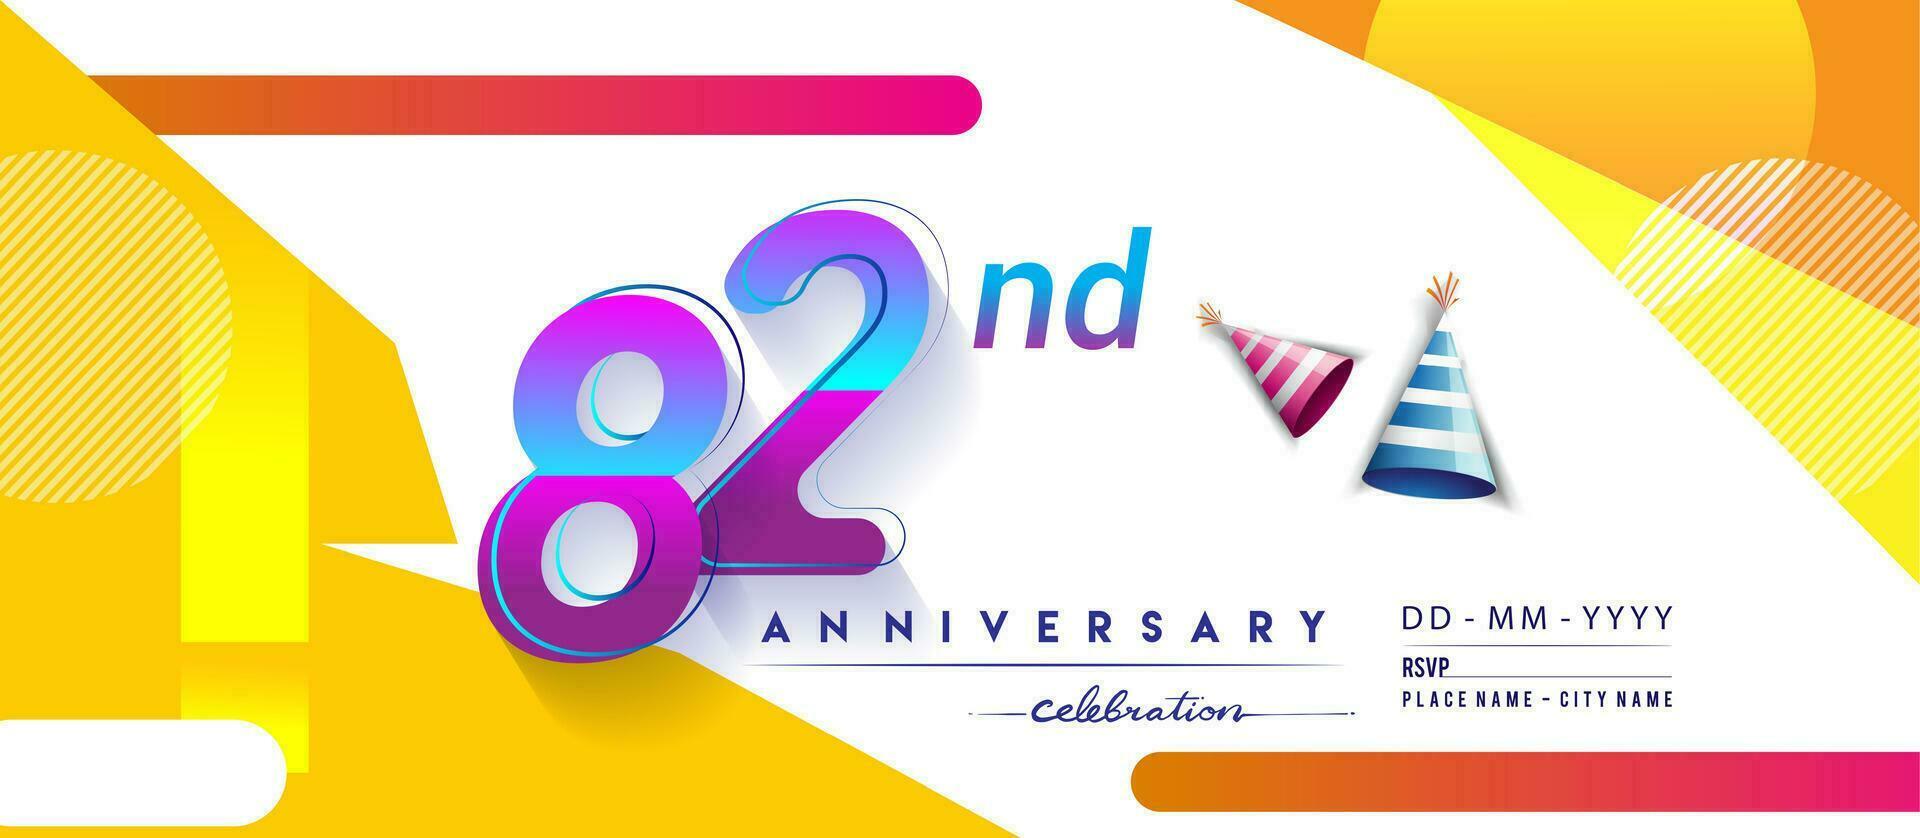 82 years anniversary logo, vector design birthday celebration with colorful geometric background and circles shape.